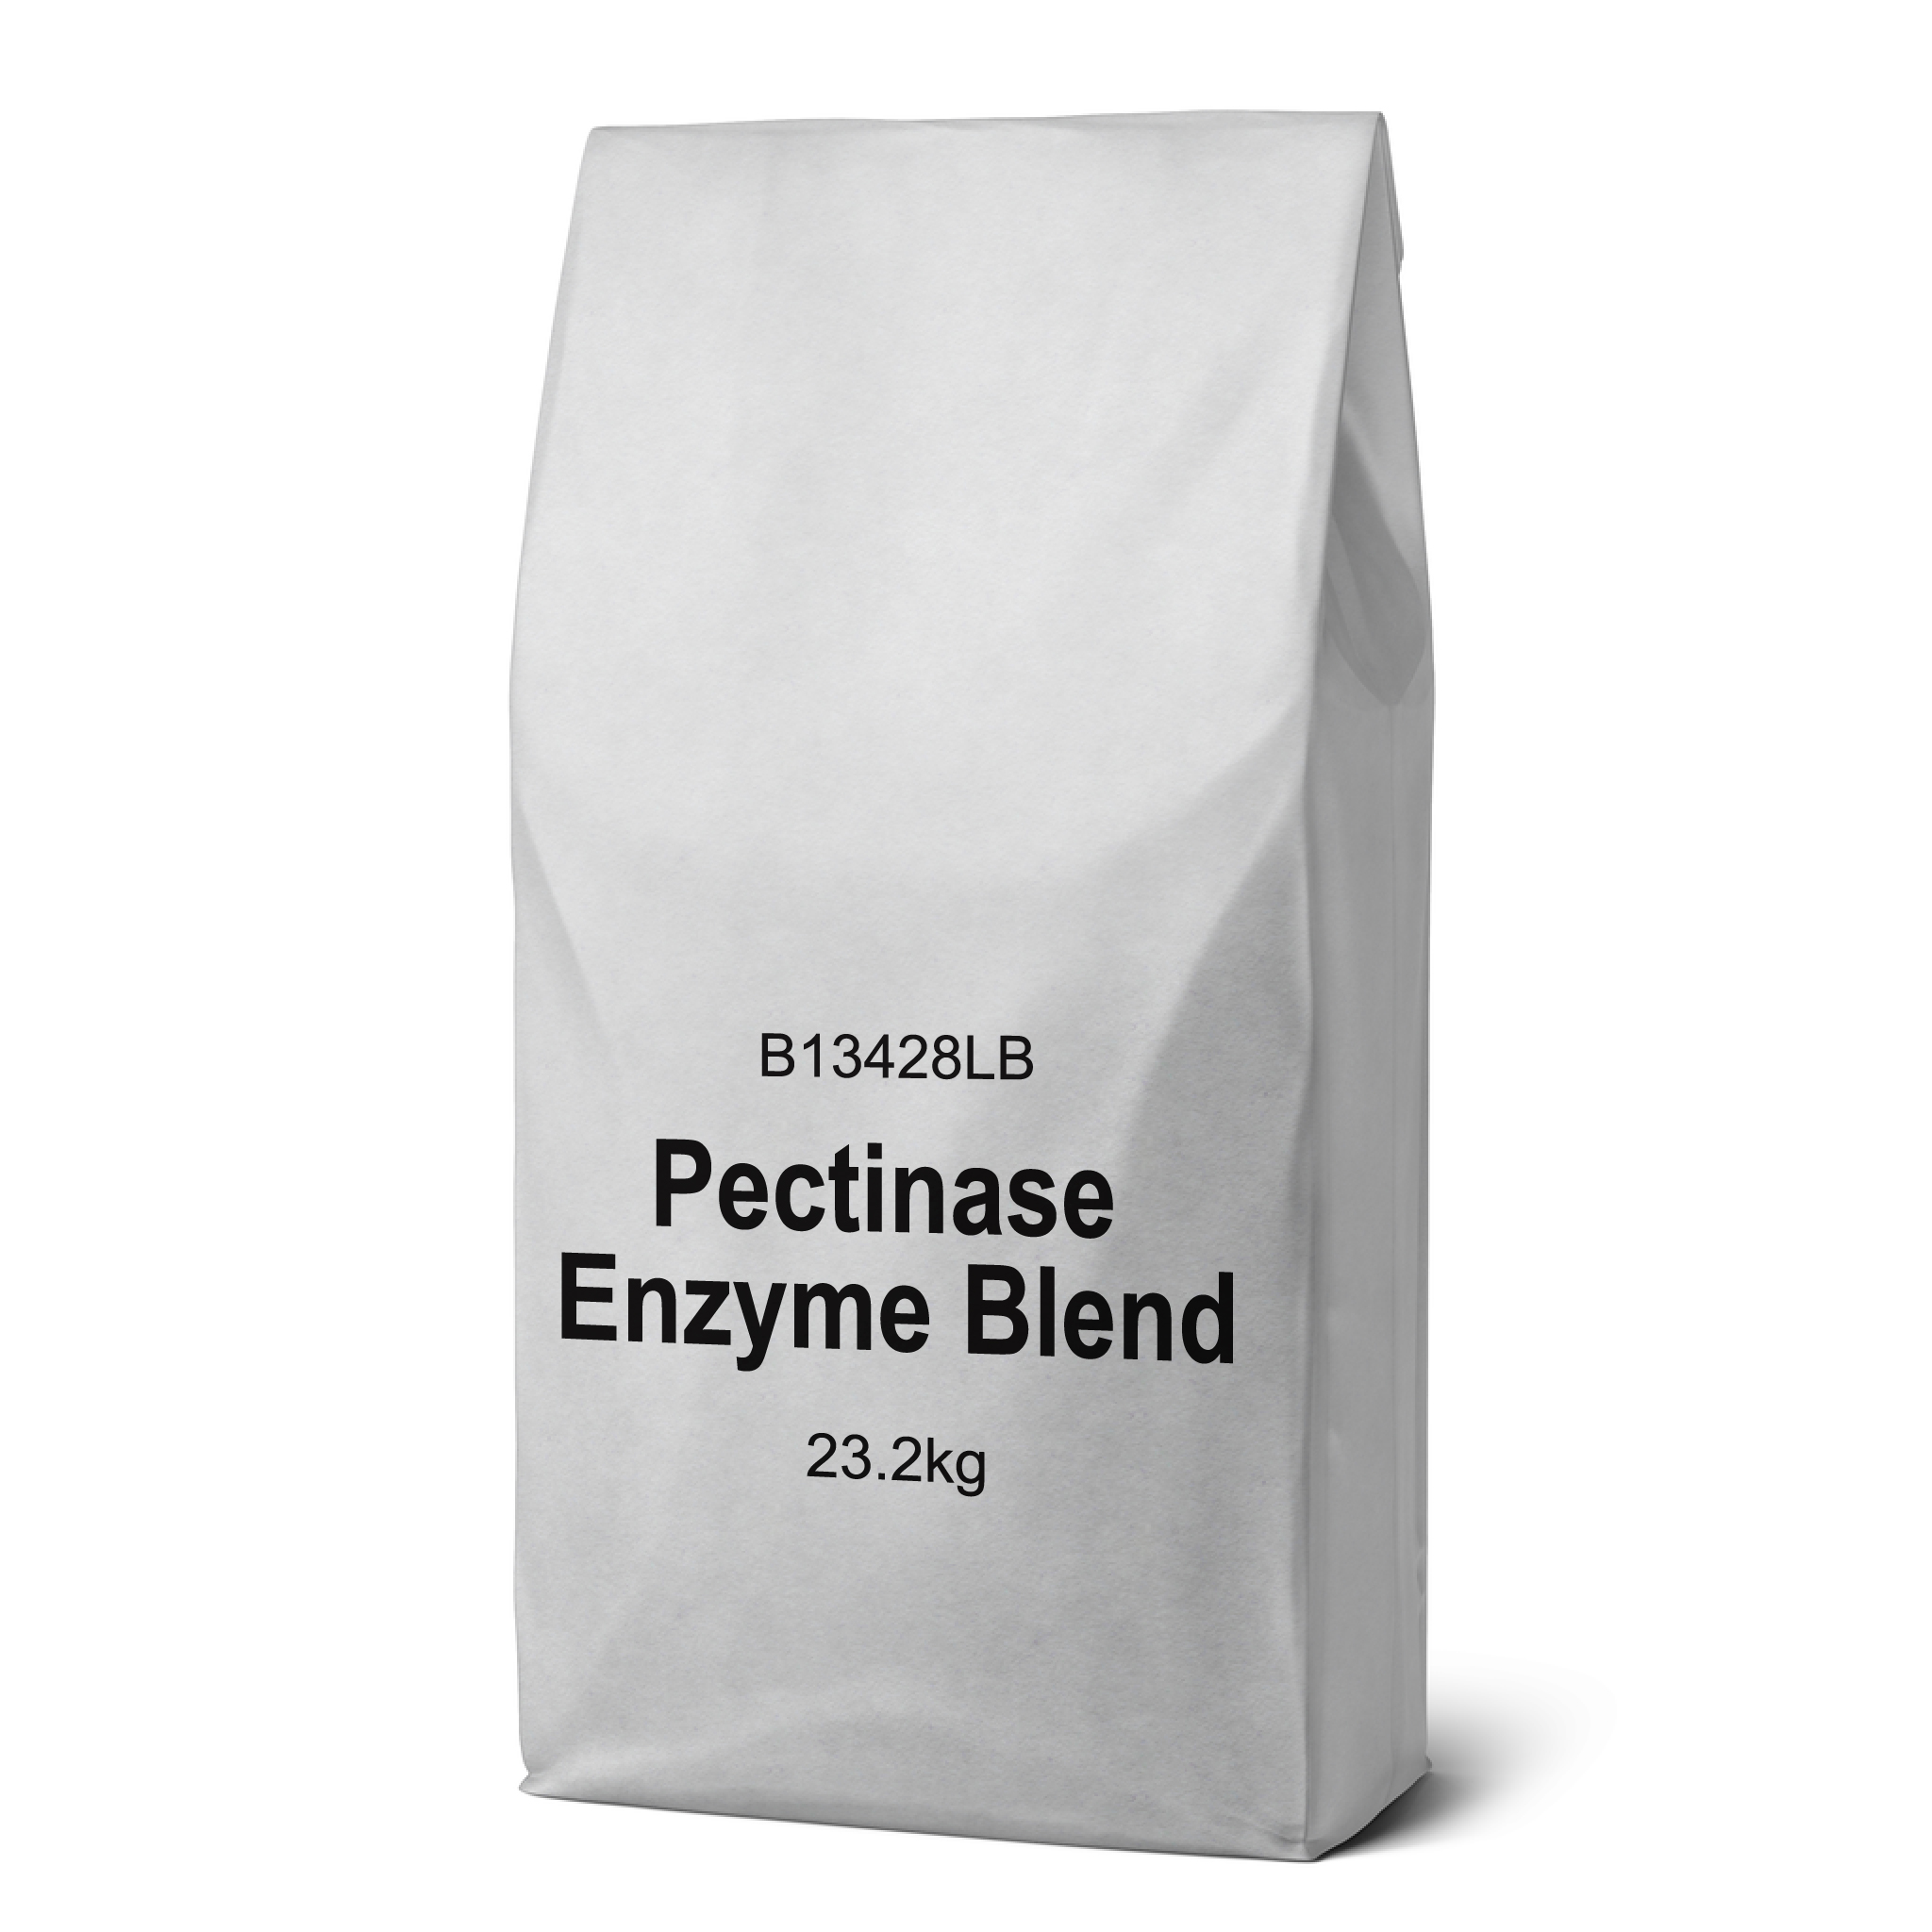 Product image for Pectinase Enzyme Blend